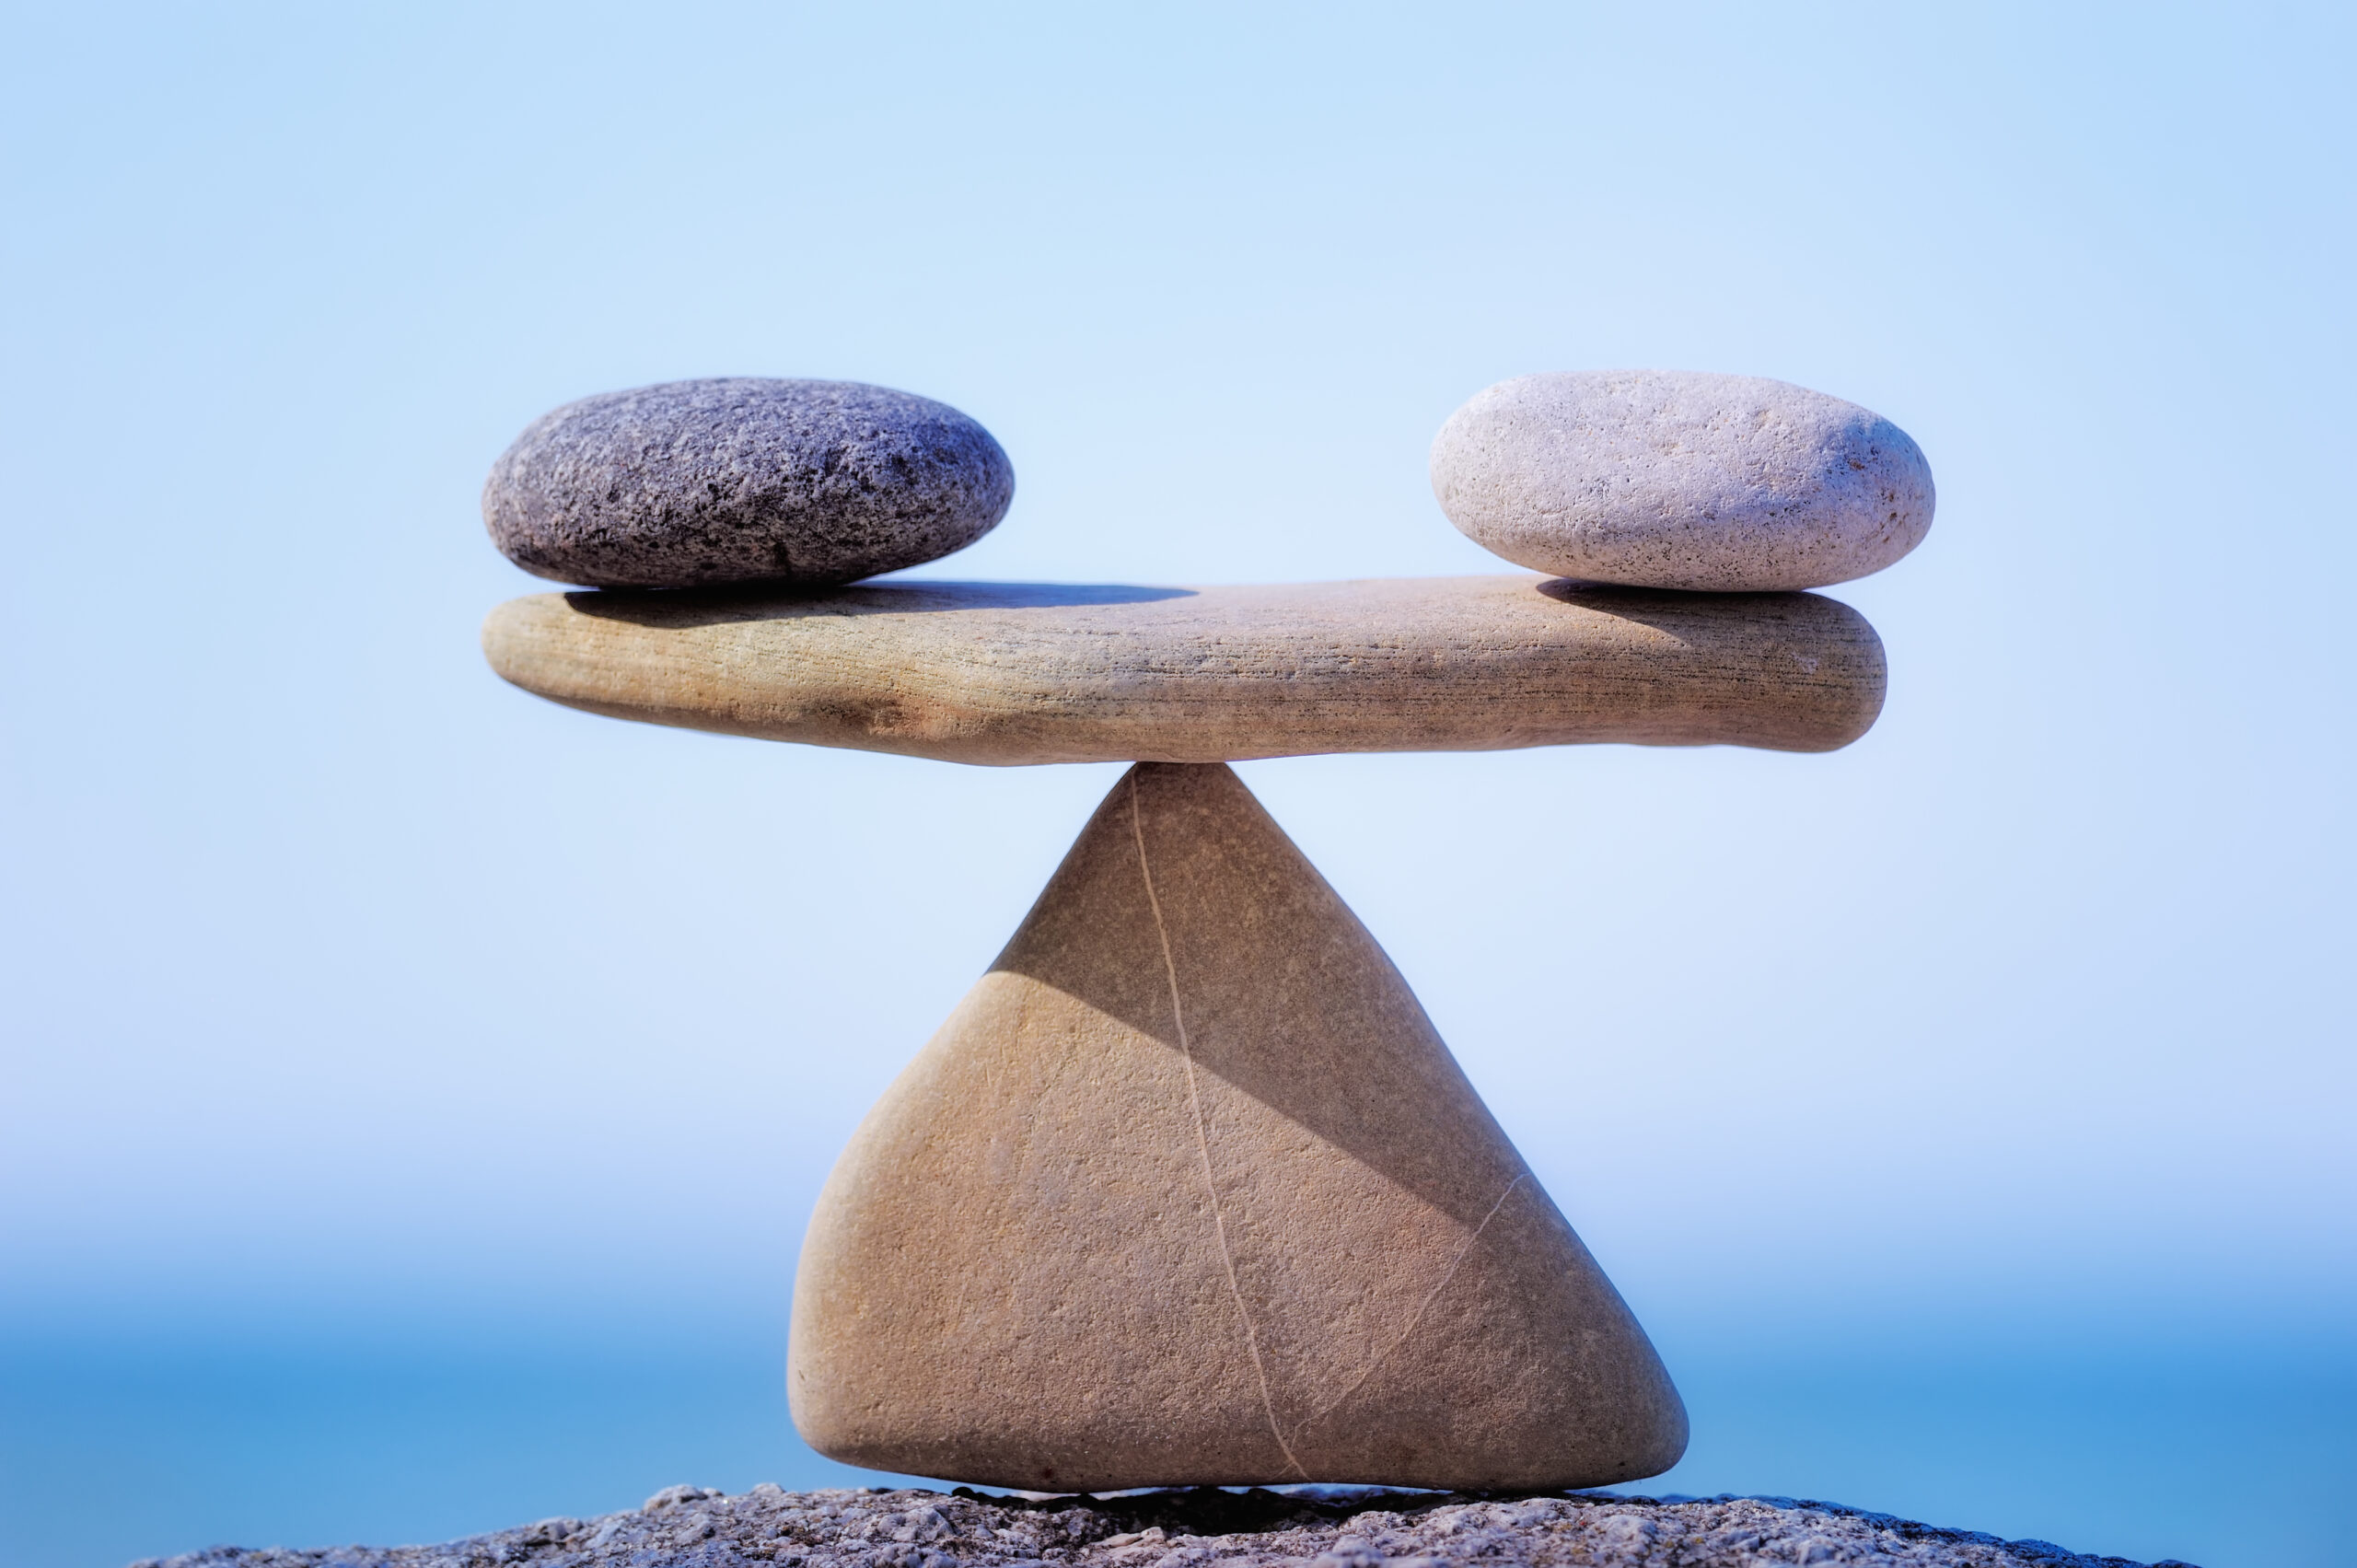 Rocks of equal weight are balanced on a point [Work-Life Balance Is Not Real!]